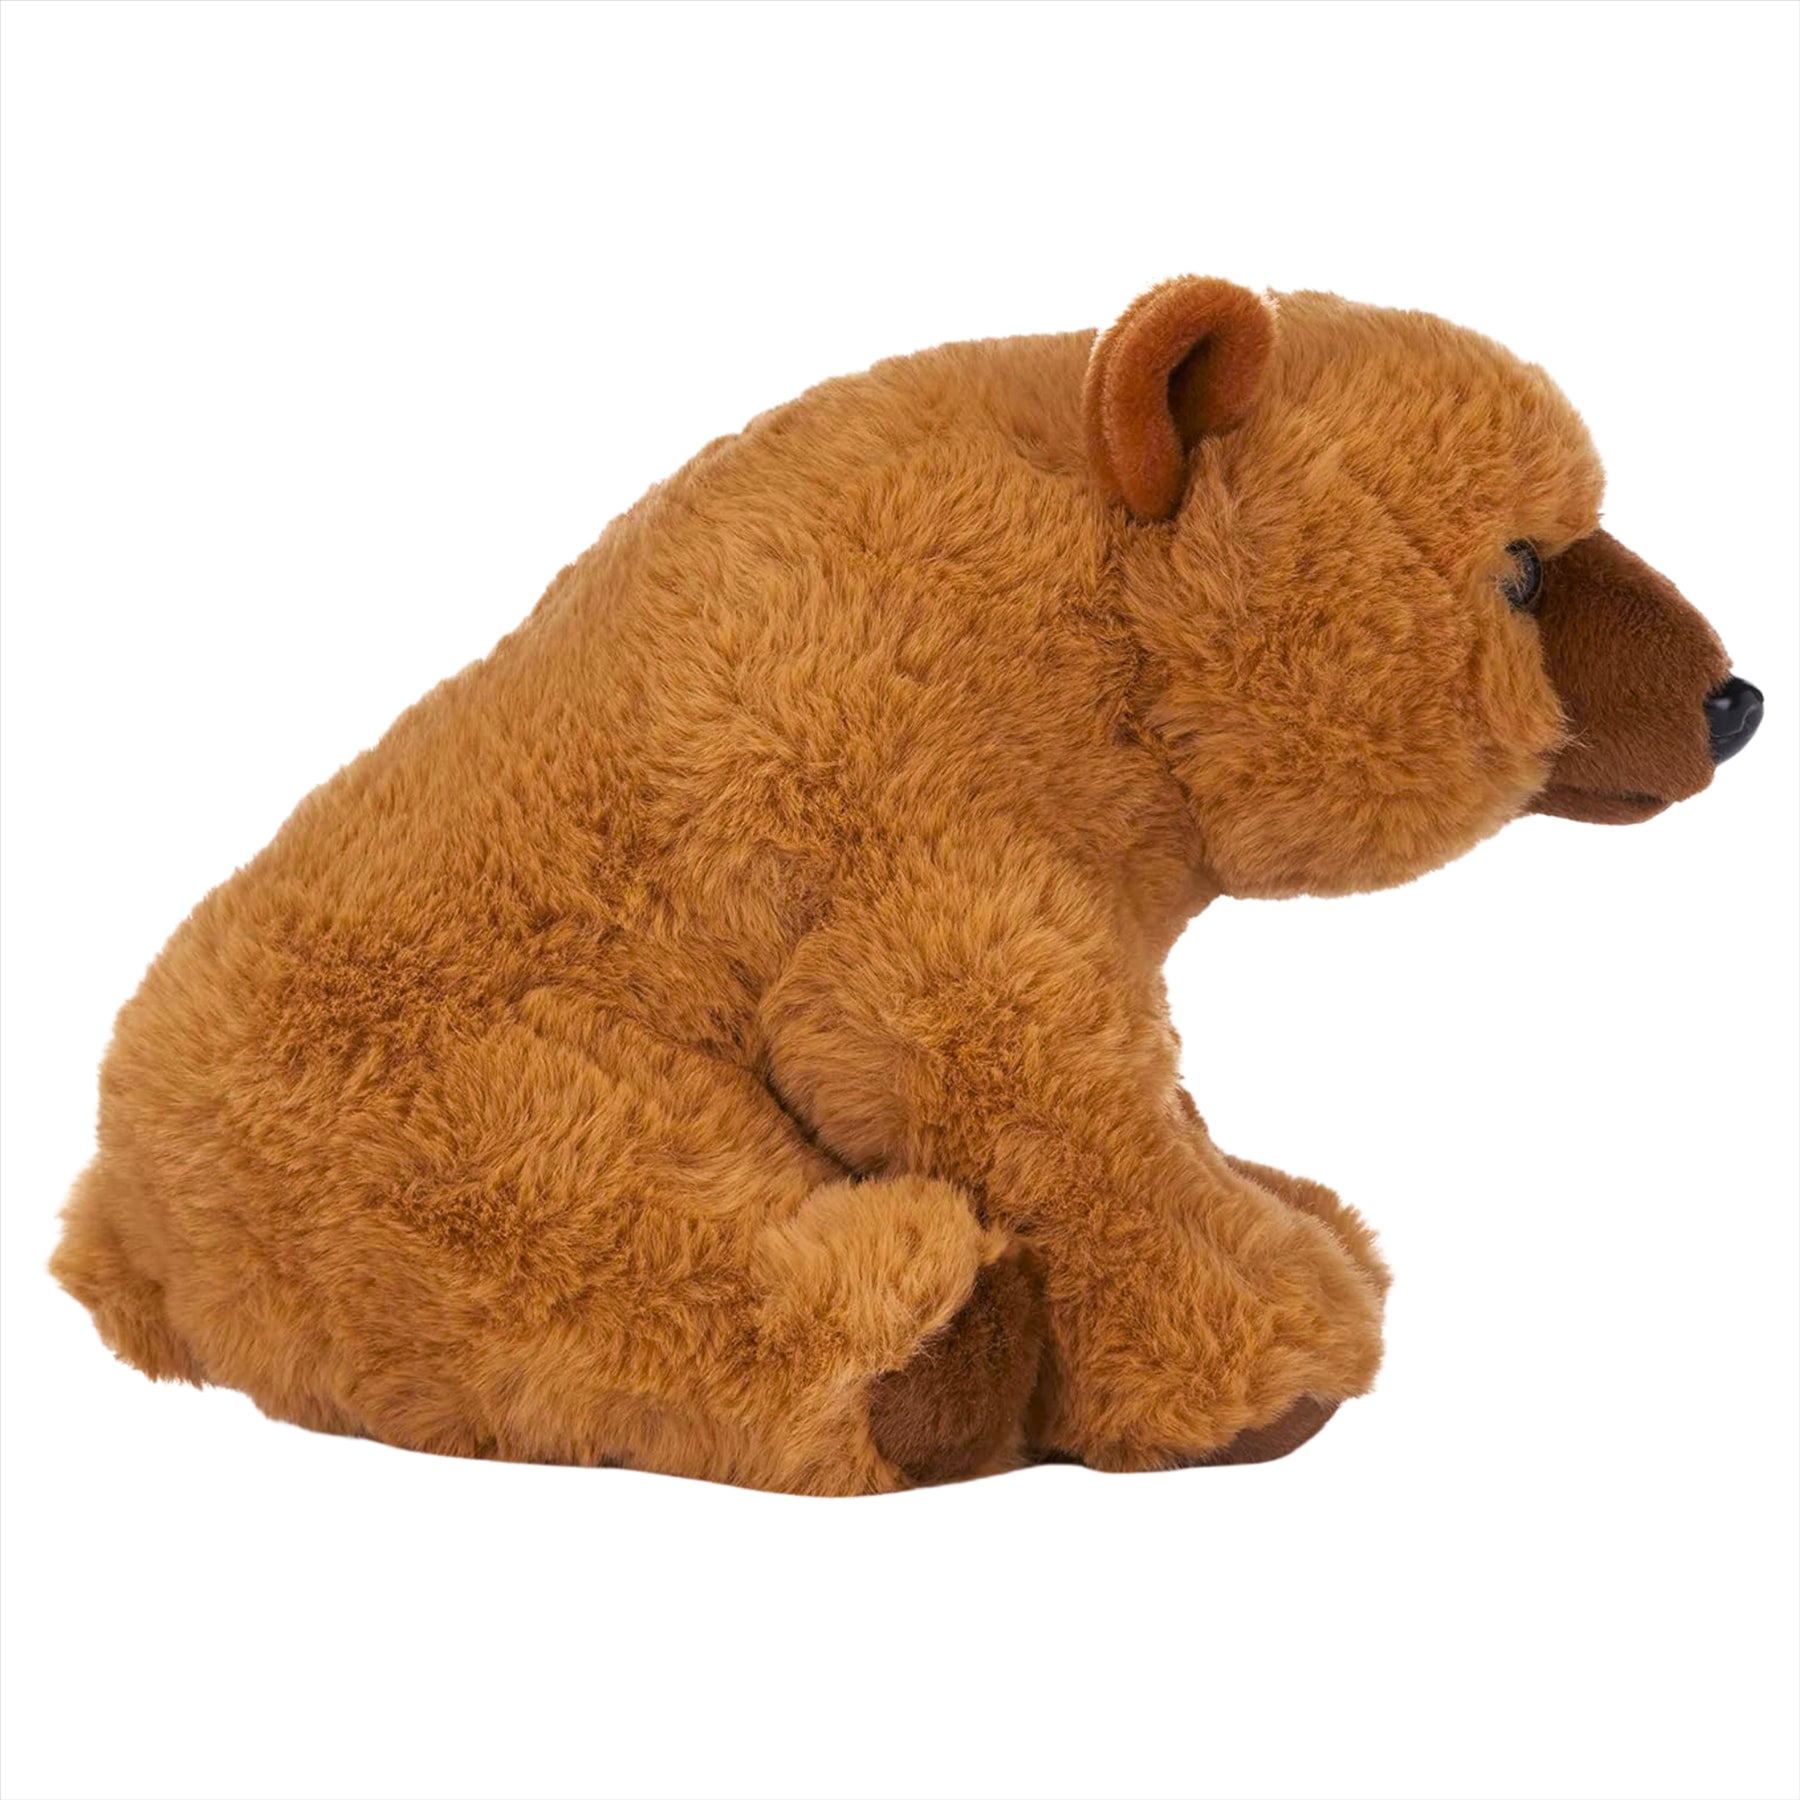 Posh Paws Around the World Animals Collection Grizzly Bear Super Soft Plush Toy 20cm 8"